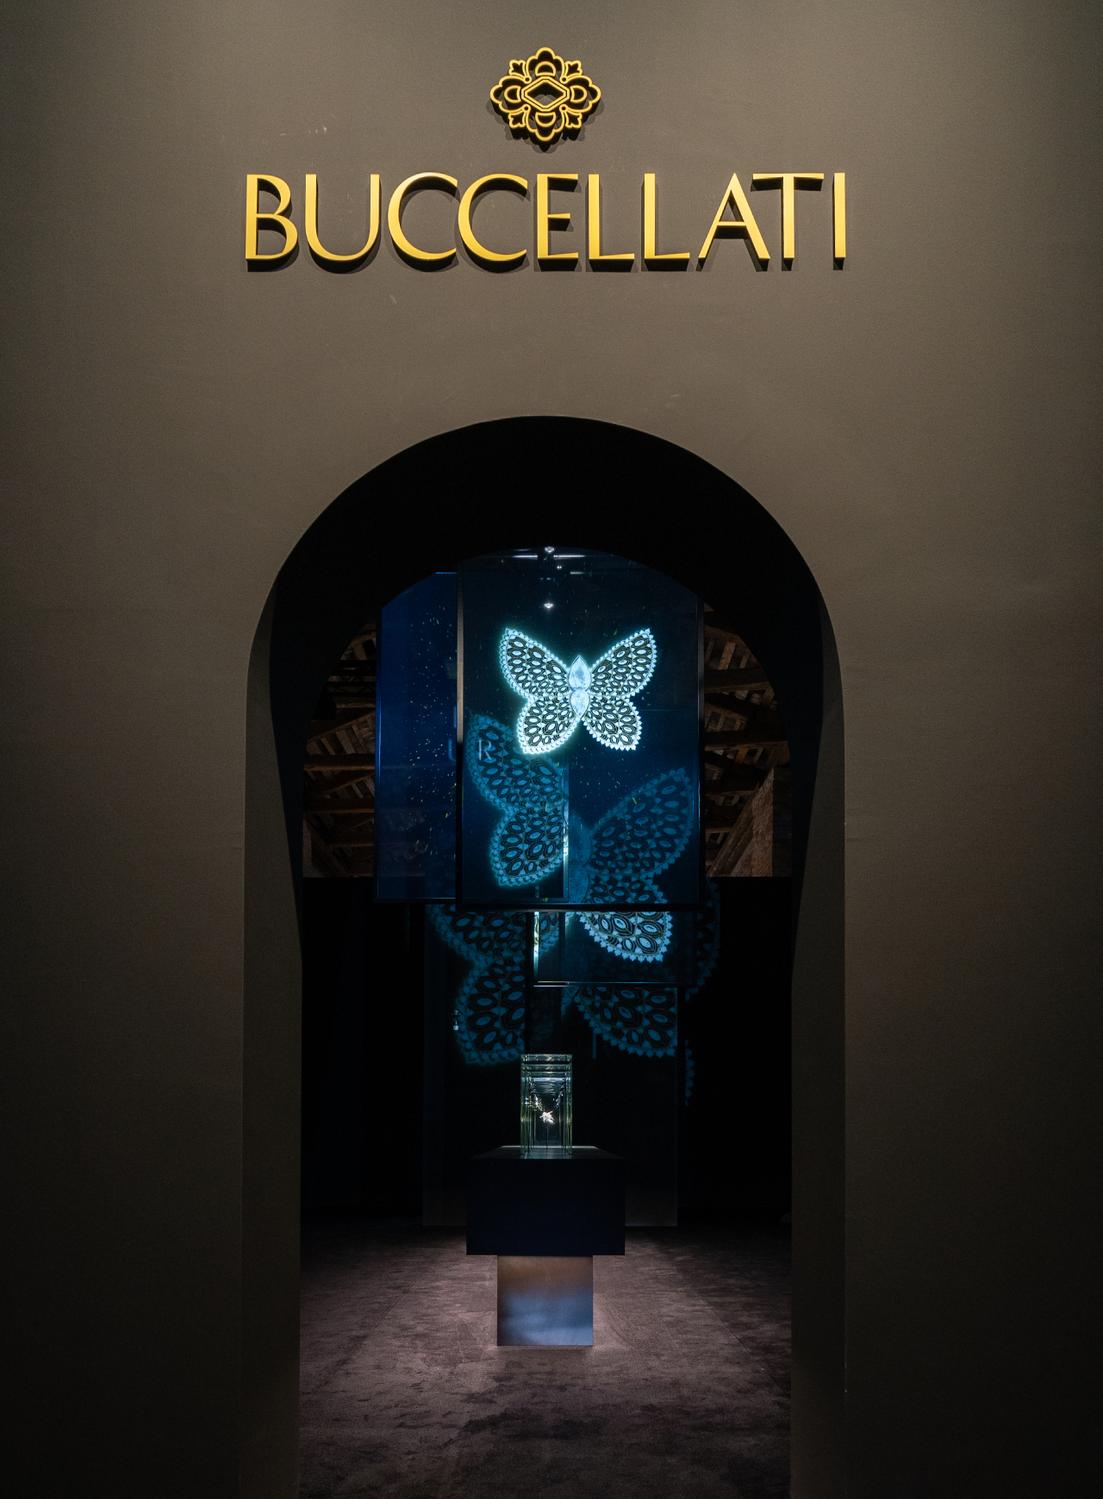 Buccellati reveals its heritage and know-how at an exhibition in Venice.